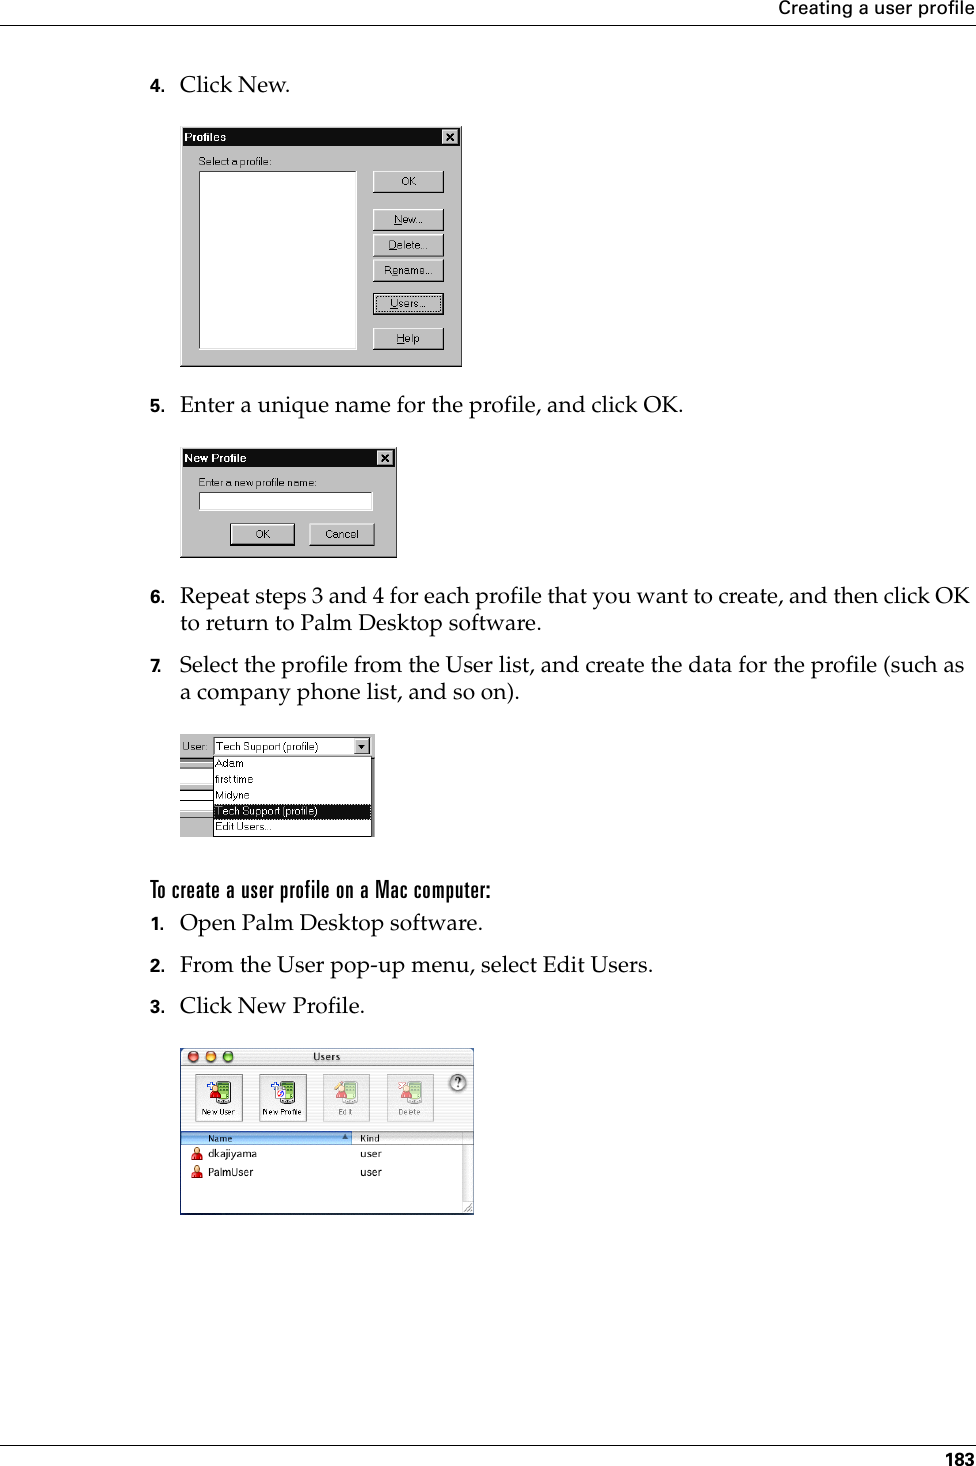 Creating a user profile1834. Click New.5. Enter a unique name for the profile, and click OK. 6. Repeat steps 3 and 4 for each profile that you want to create, and then click OK to return to Palm Desktop software. 7. Select the profile from the User list, and create the data for the profile (such as a company phone list, and so on).To create a user profile on a Mac computer:1. Open Palm Desktop software.2. From the User pop-up menu, select Edit Users.3. Click New Profile.Palm, Inc. Confidential